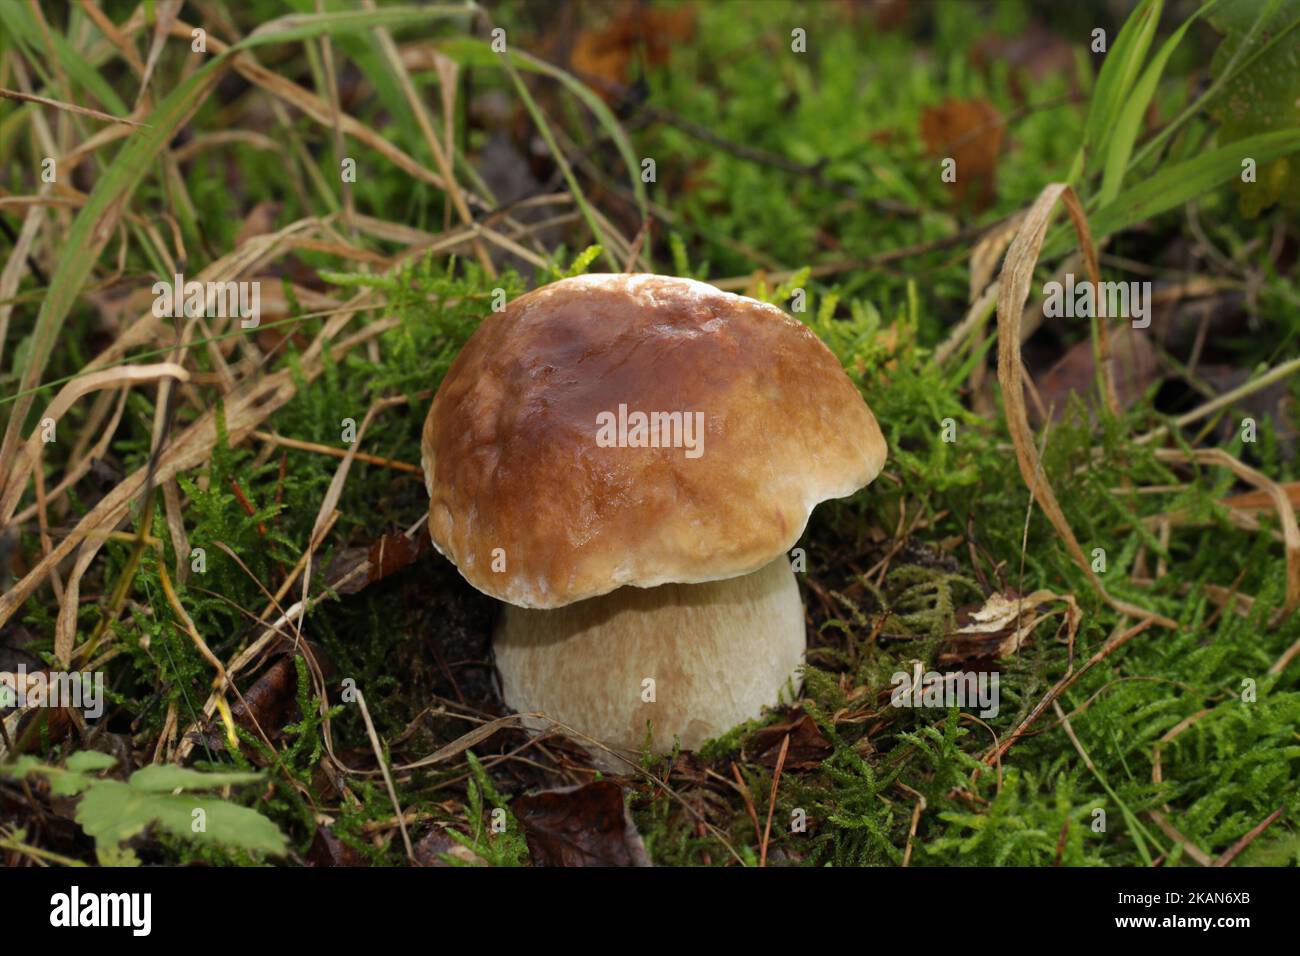 The wild edible fungus (Boletus edulis) grows in the forest. The fruit body has a large brown cap and a stout brownish-white stipe. Stock Photo